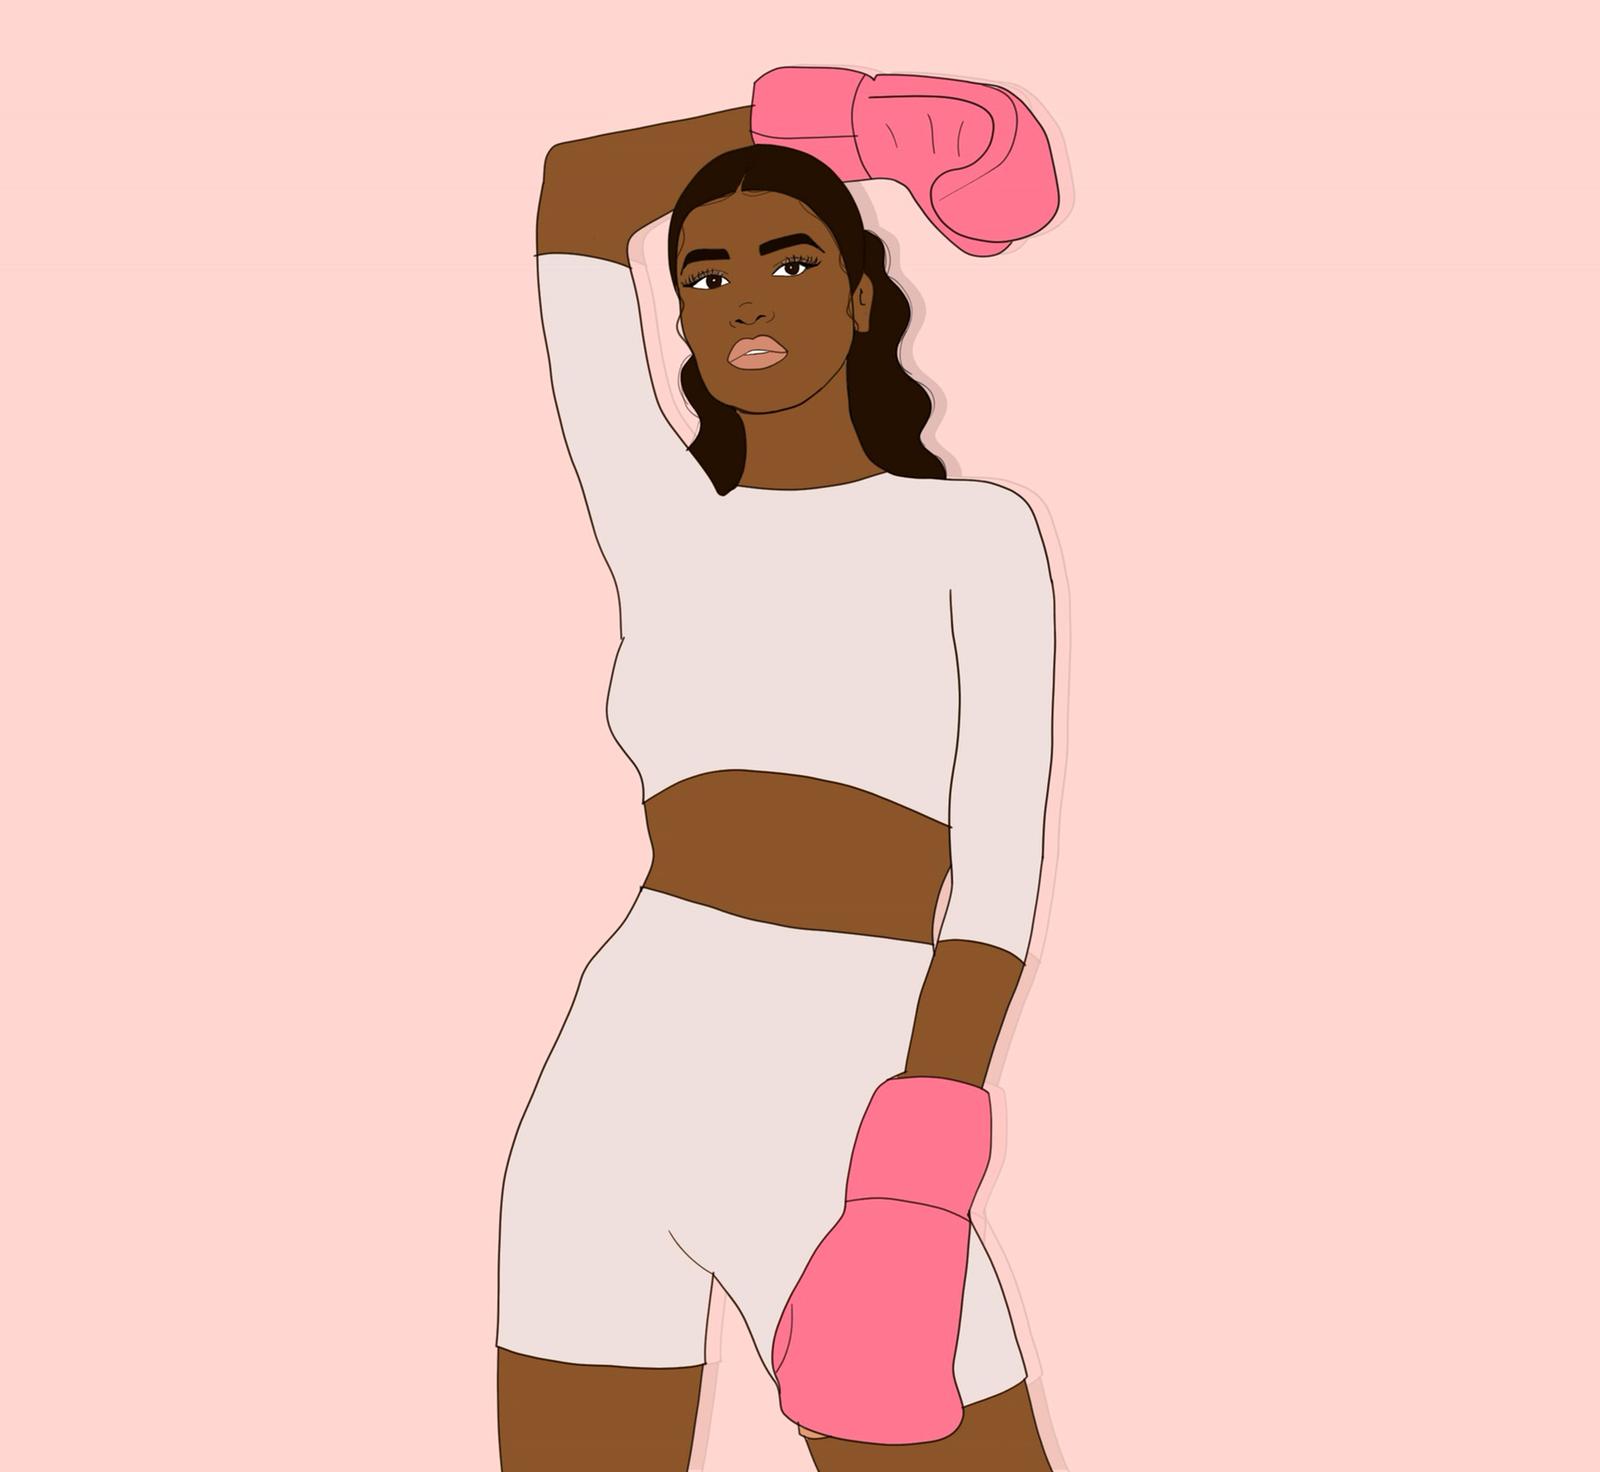 A girl boxer trying to dismantle gender inequality in professional sports